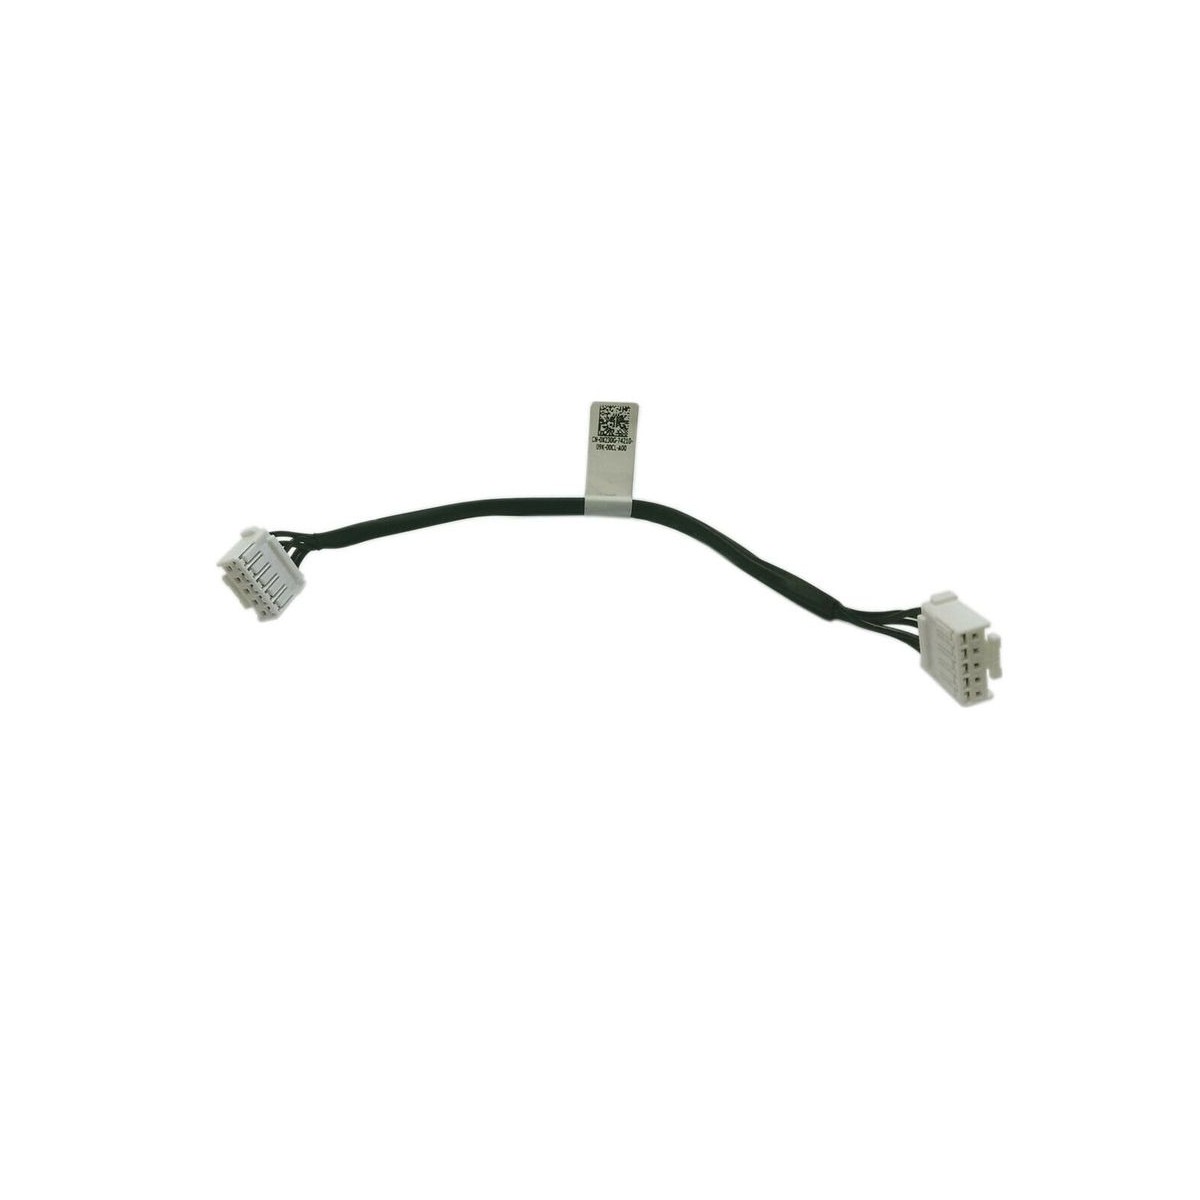 DELL BACKPLANE SIGNAL CABLE PE T410 0X230G